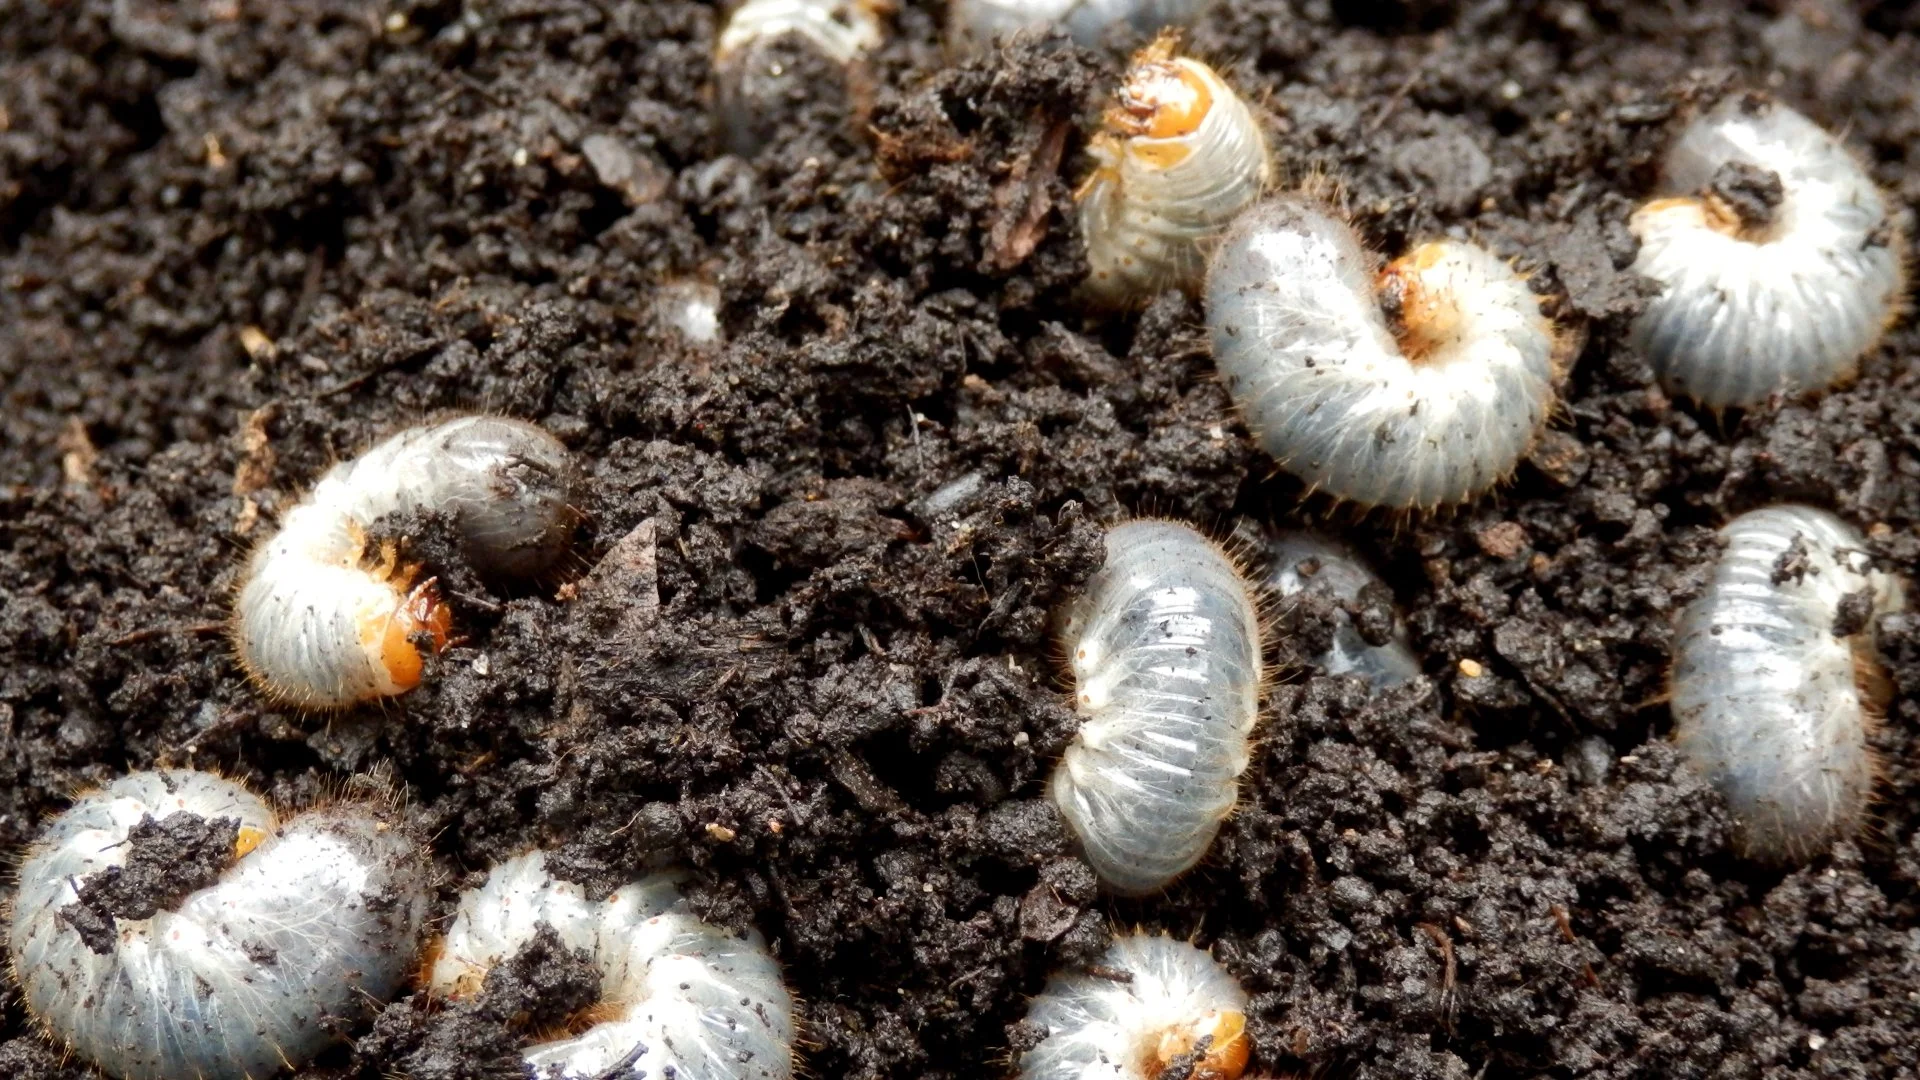 Grubs Are Bad News for Your Lawn - Are You Ready for Them?